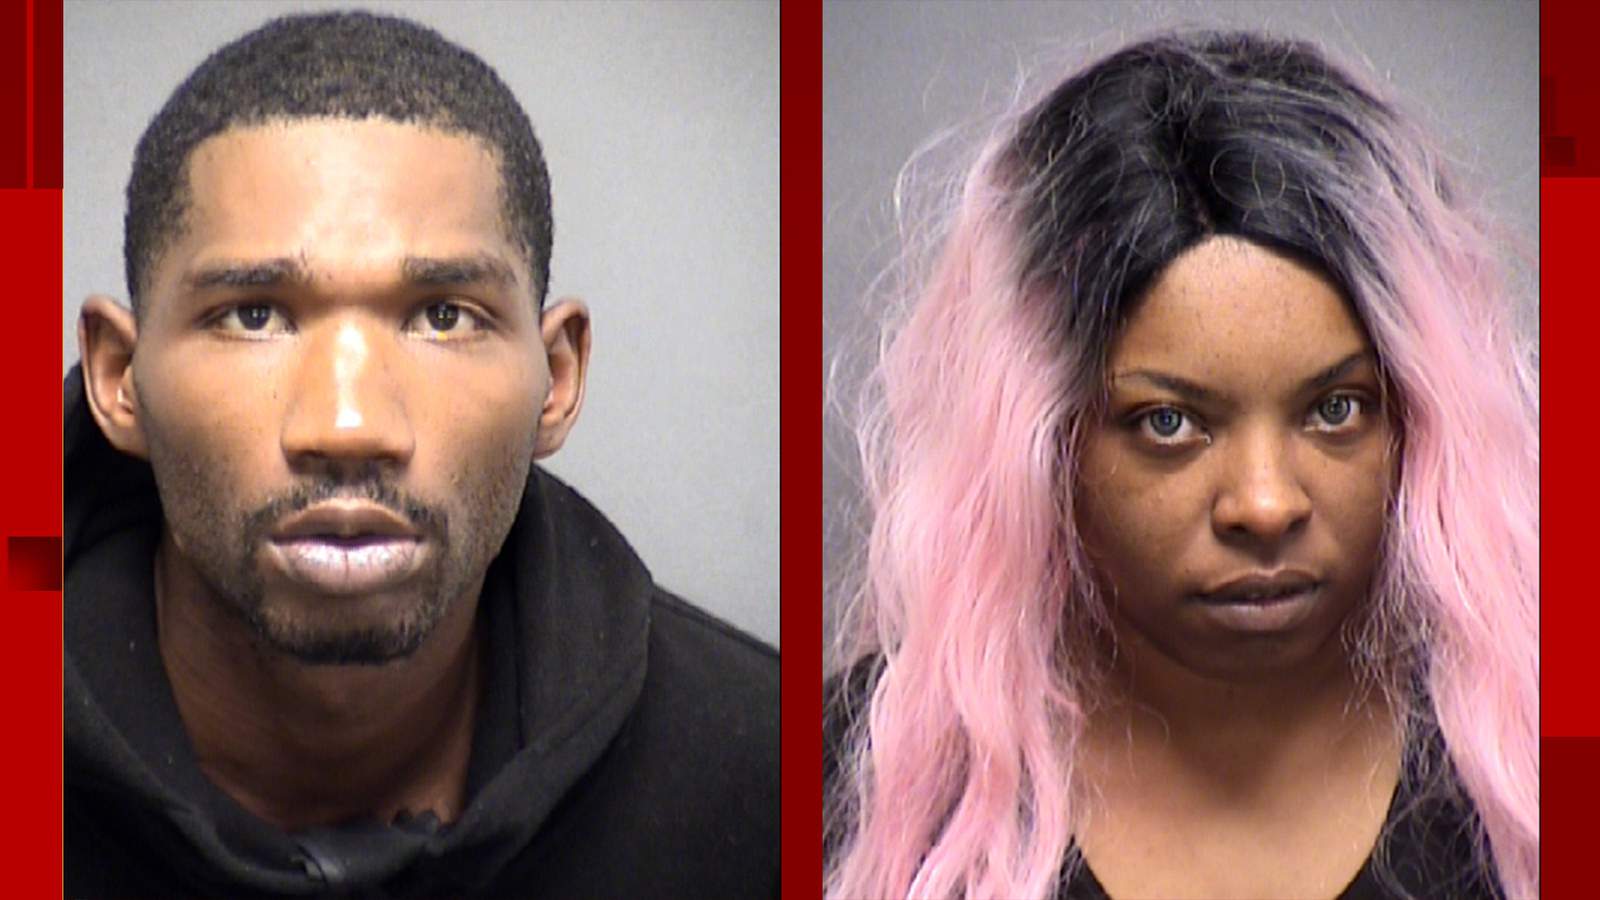 Affidavit: Man, woman linked to 4 robberies in San Antonio planned crimes after watching TV crime show